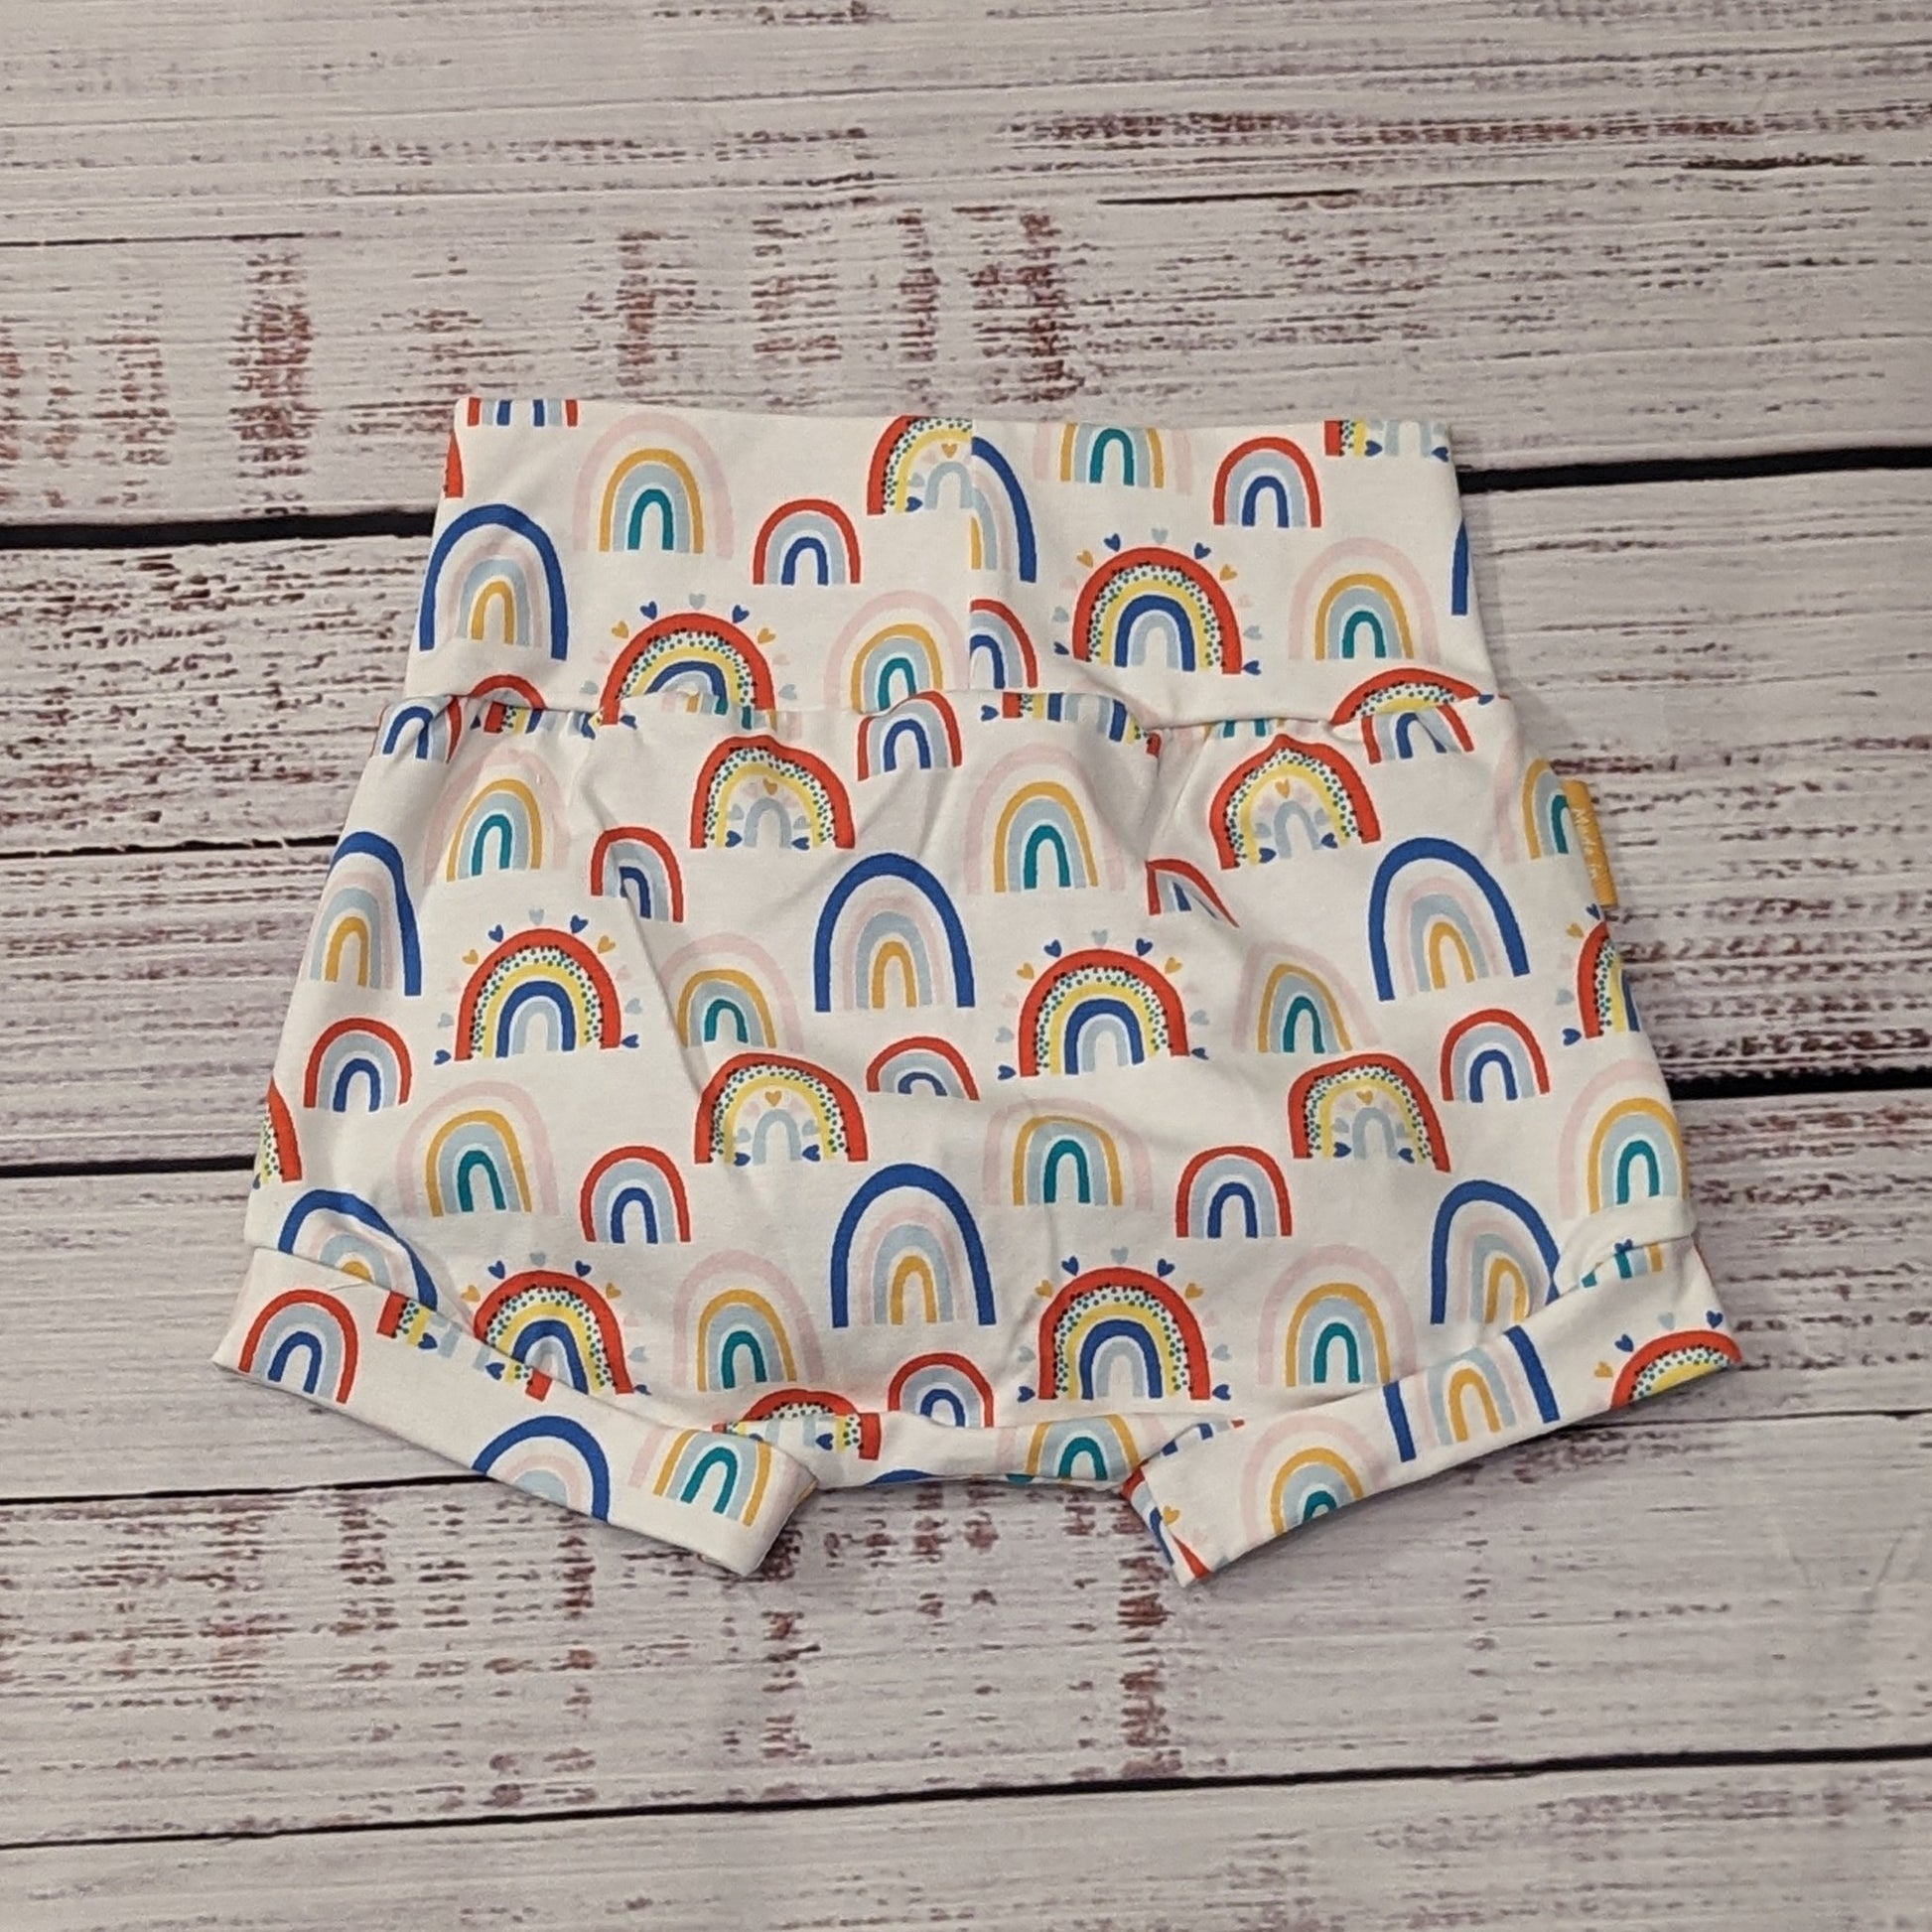 The fun colourful rainbows and hearts on white shorts. Handmade using white colourful rainbow hearts cotton jersey. Shown from the rear.